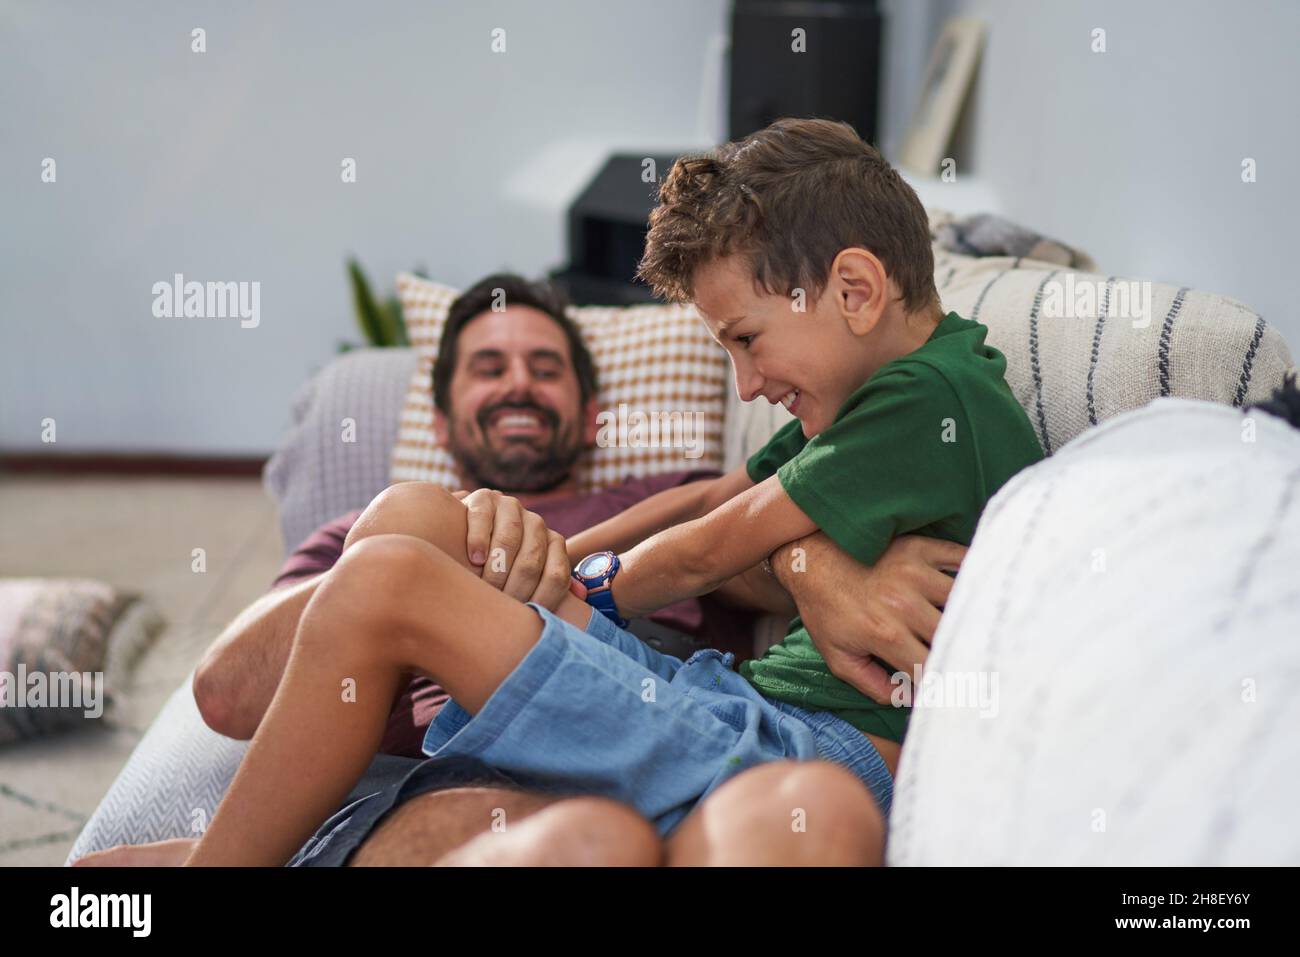 Playful father tickling son on living room sofa Stock Photo